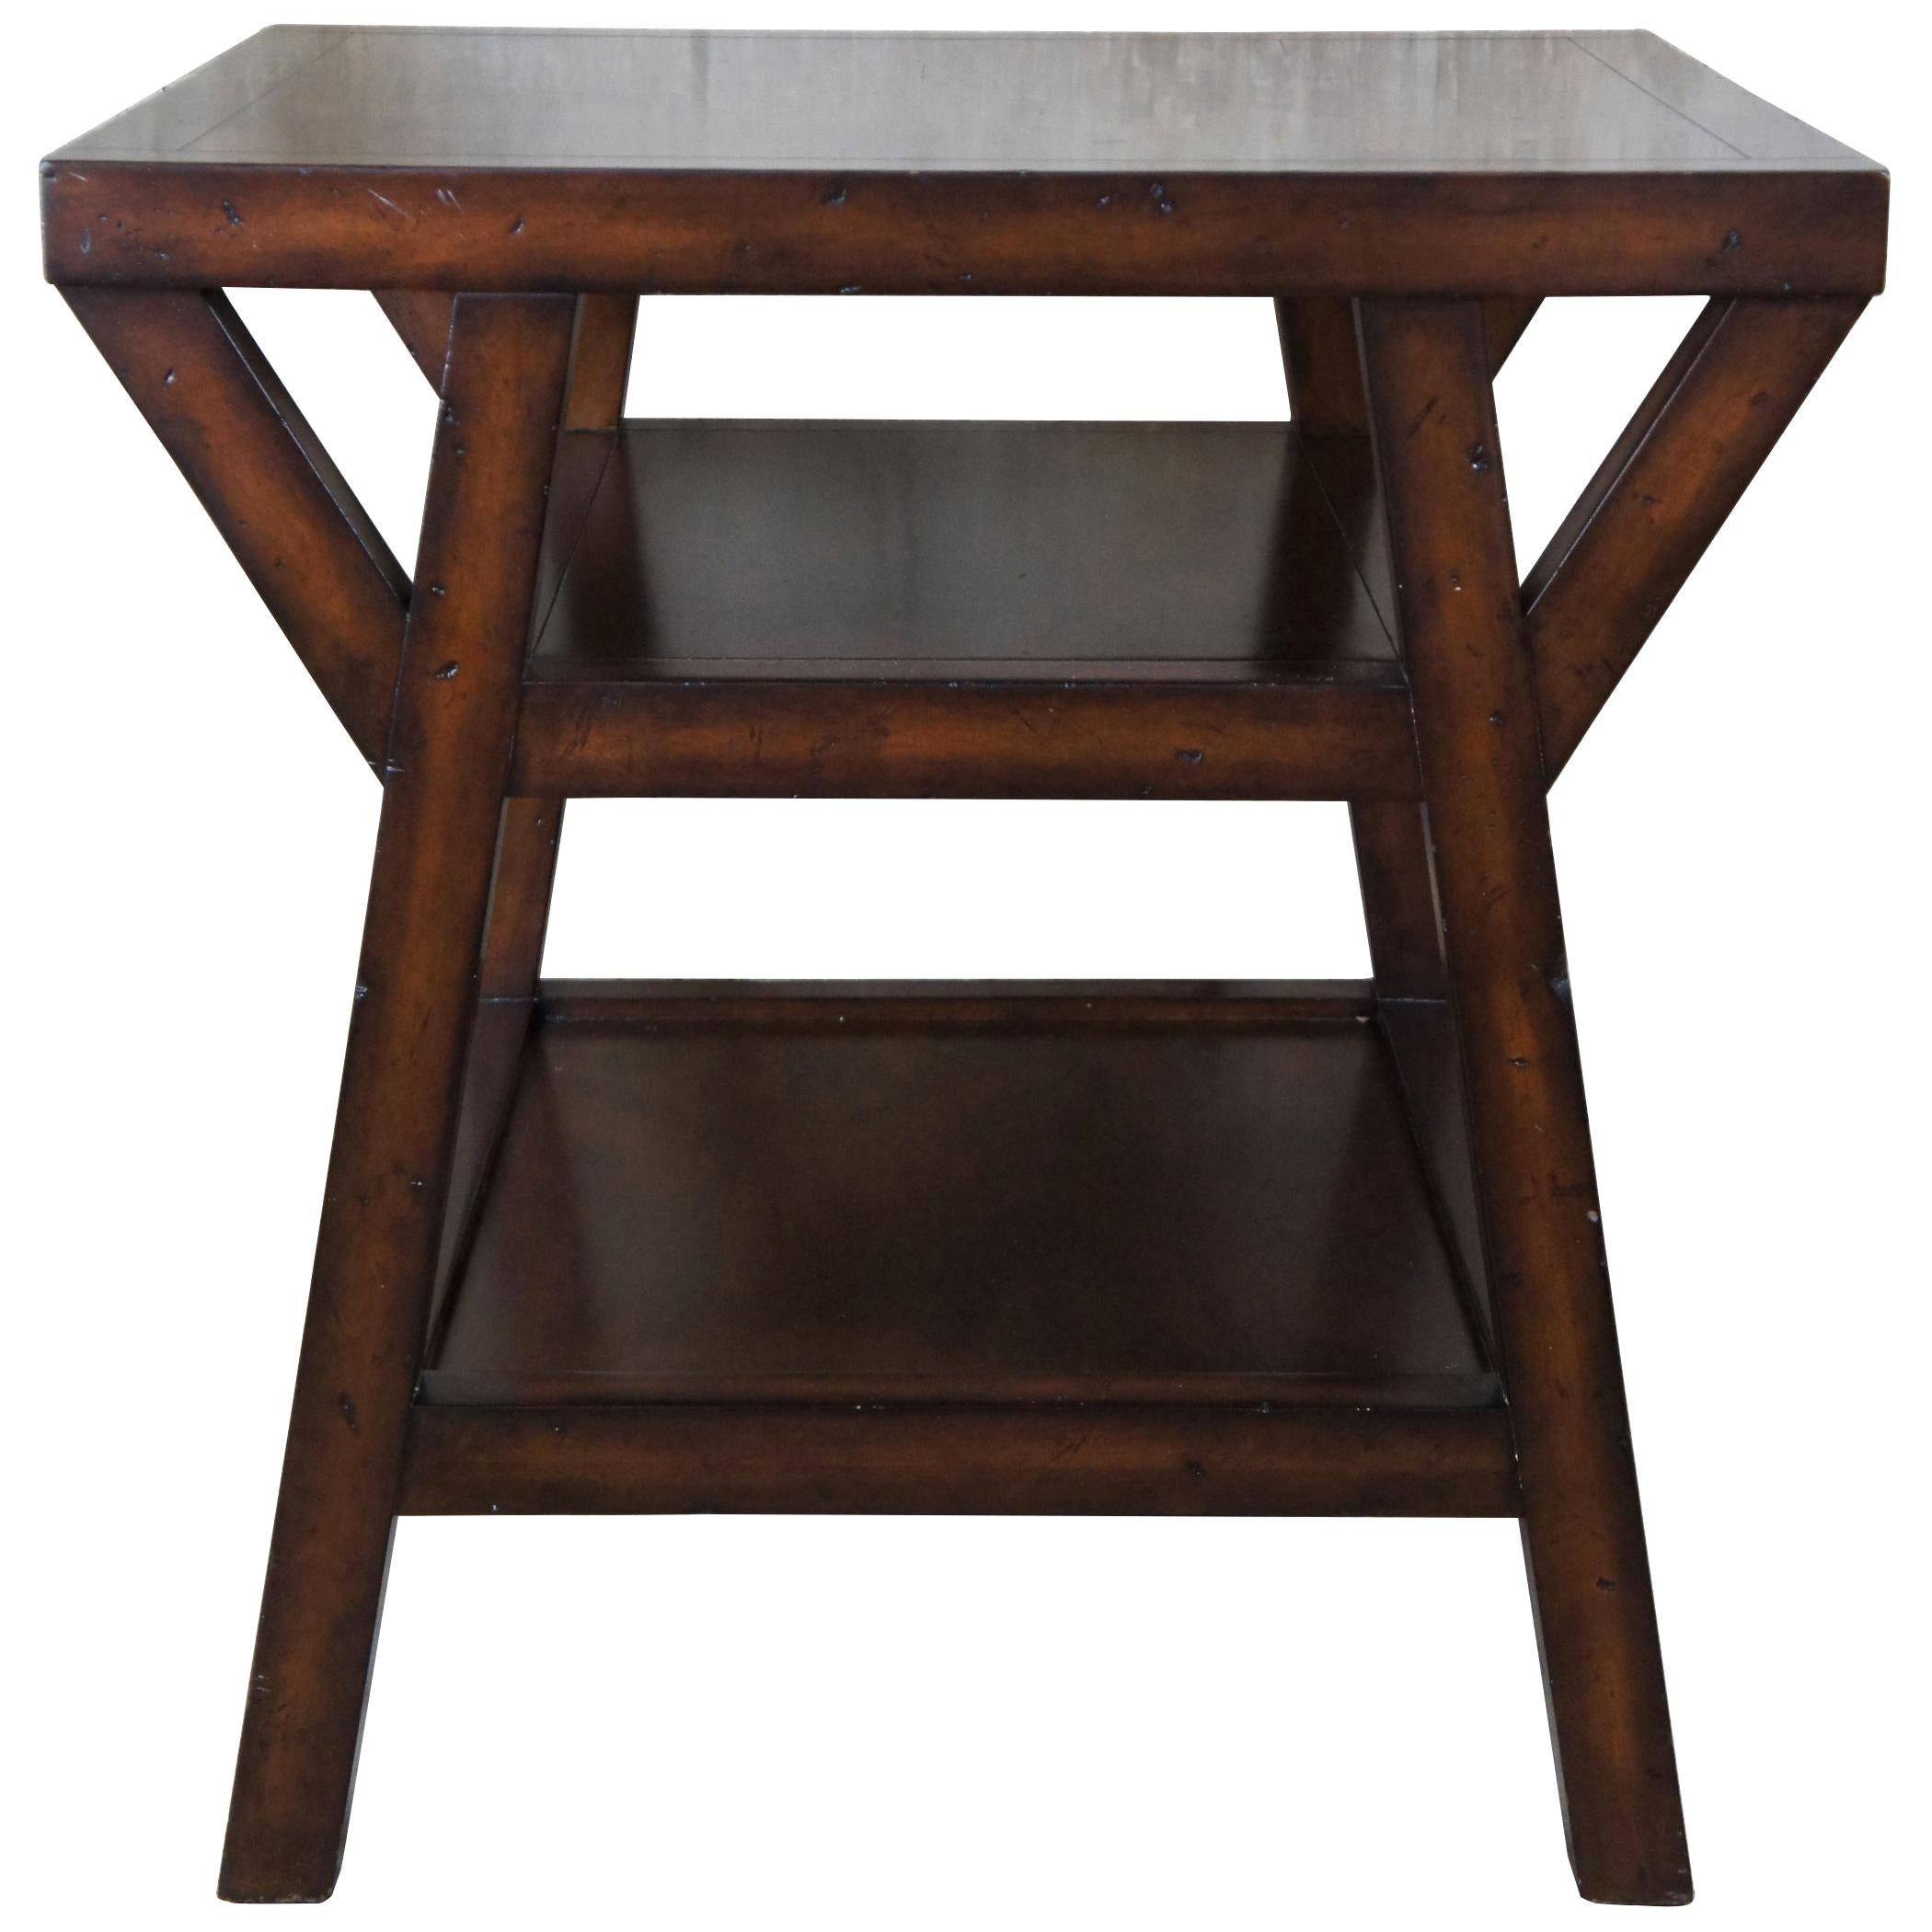 Ralph Lauren Traditional Distressed Mahogany Square Tiered Side Accent Table